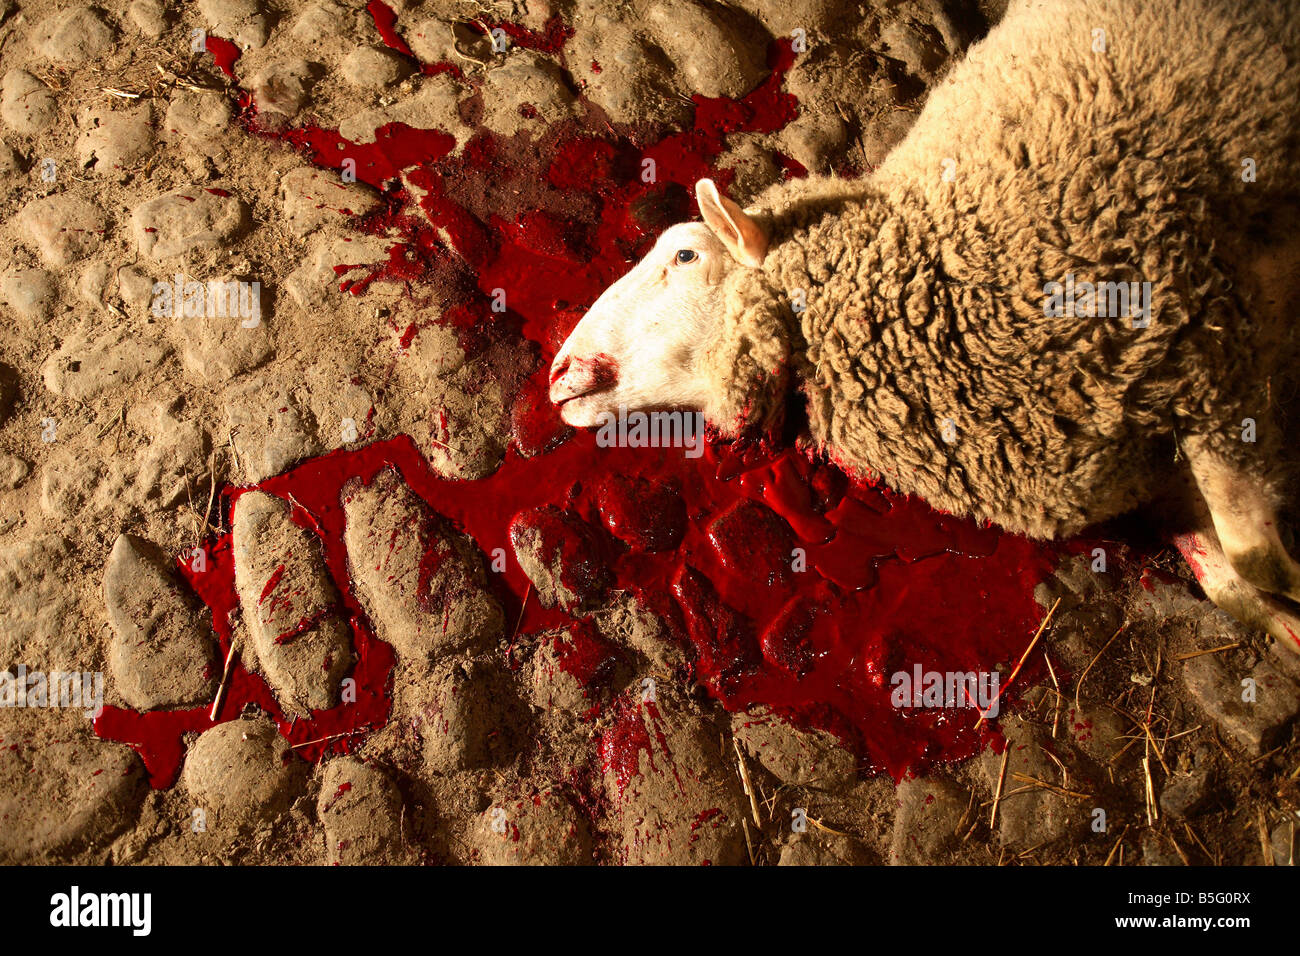 A bled out sheep lying on the ground Stock Photo